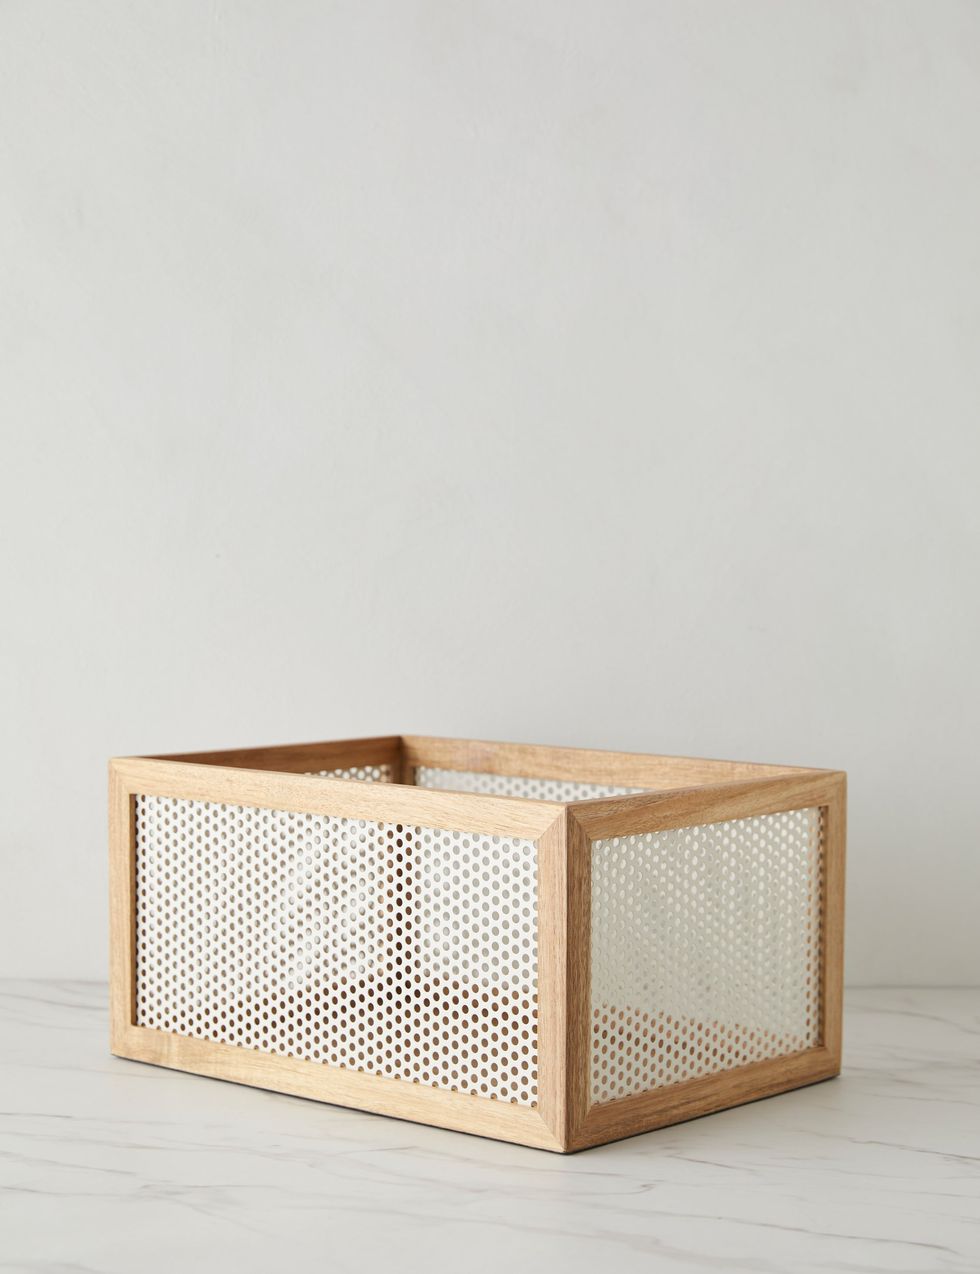 Perforated Basket